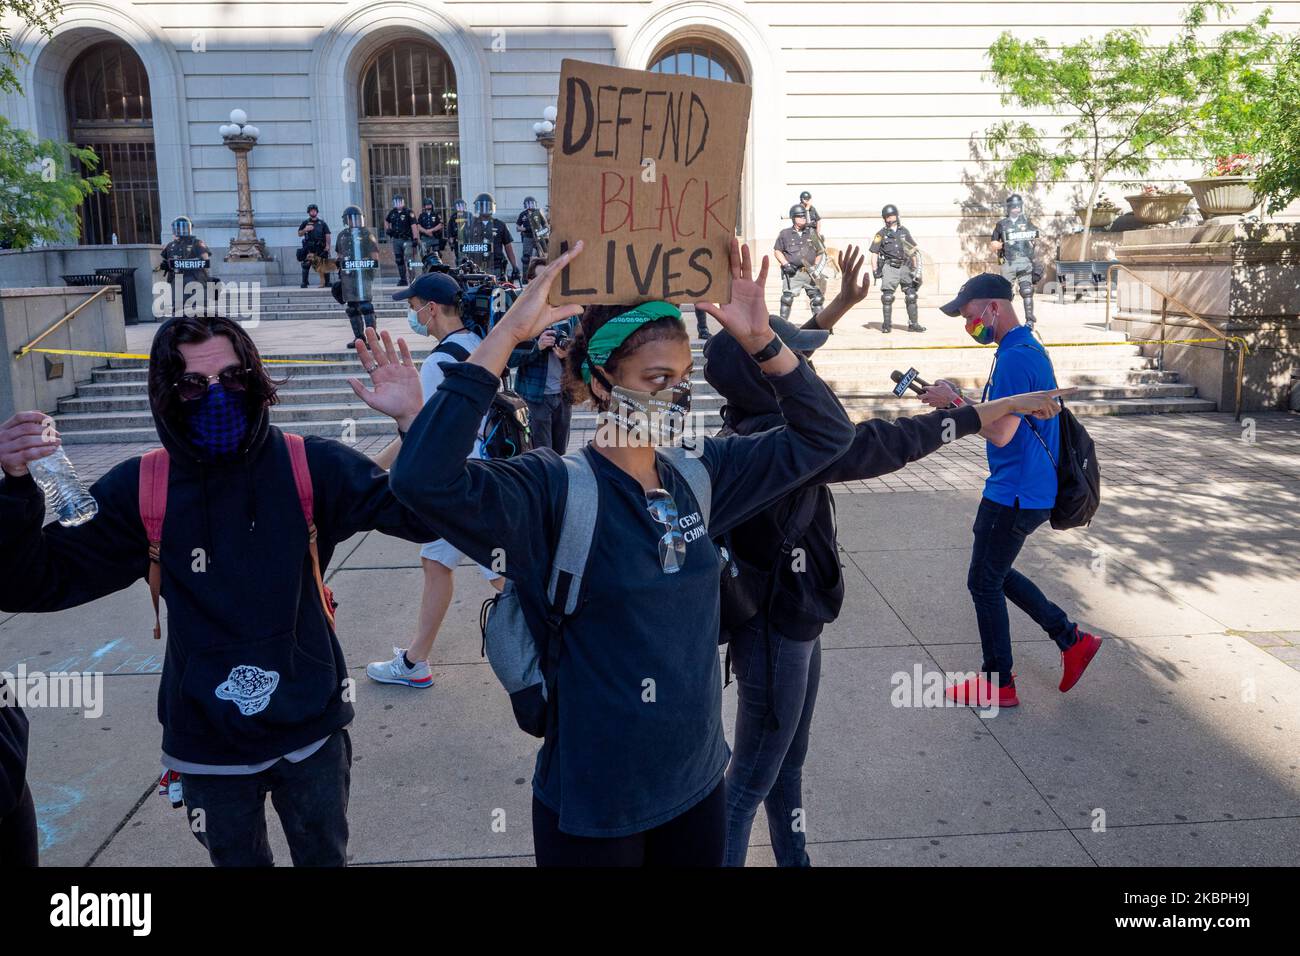 A woman holds up a sign during a protest of the death of George Floyd as demonstrators stand-off with members of the Hamilton County Sheriff’s Department, Sunday, May 31, 2020, in Cincinnati, Ohio, United States. (Photo by Jason Whitman/NurPhoto) Stock Photo